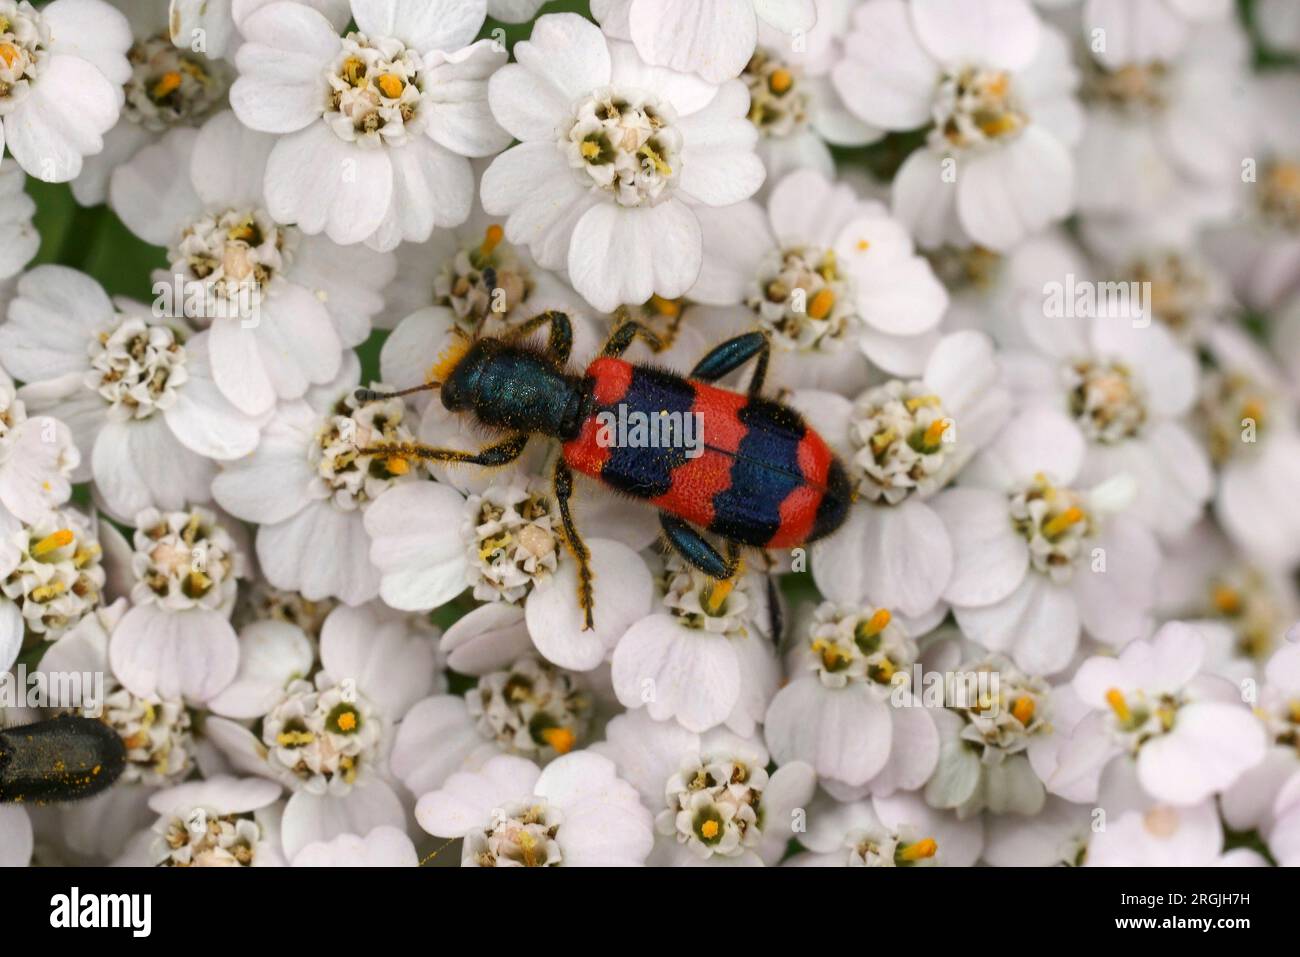 Natural closeup on a red and black striped bea-eating beetle, Trichodes apiarius sitting on a white common yarrow flower , Achillea millefolium Stock Photo